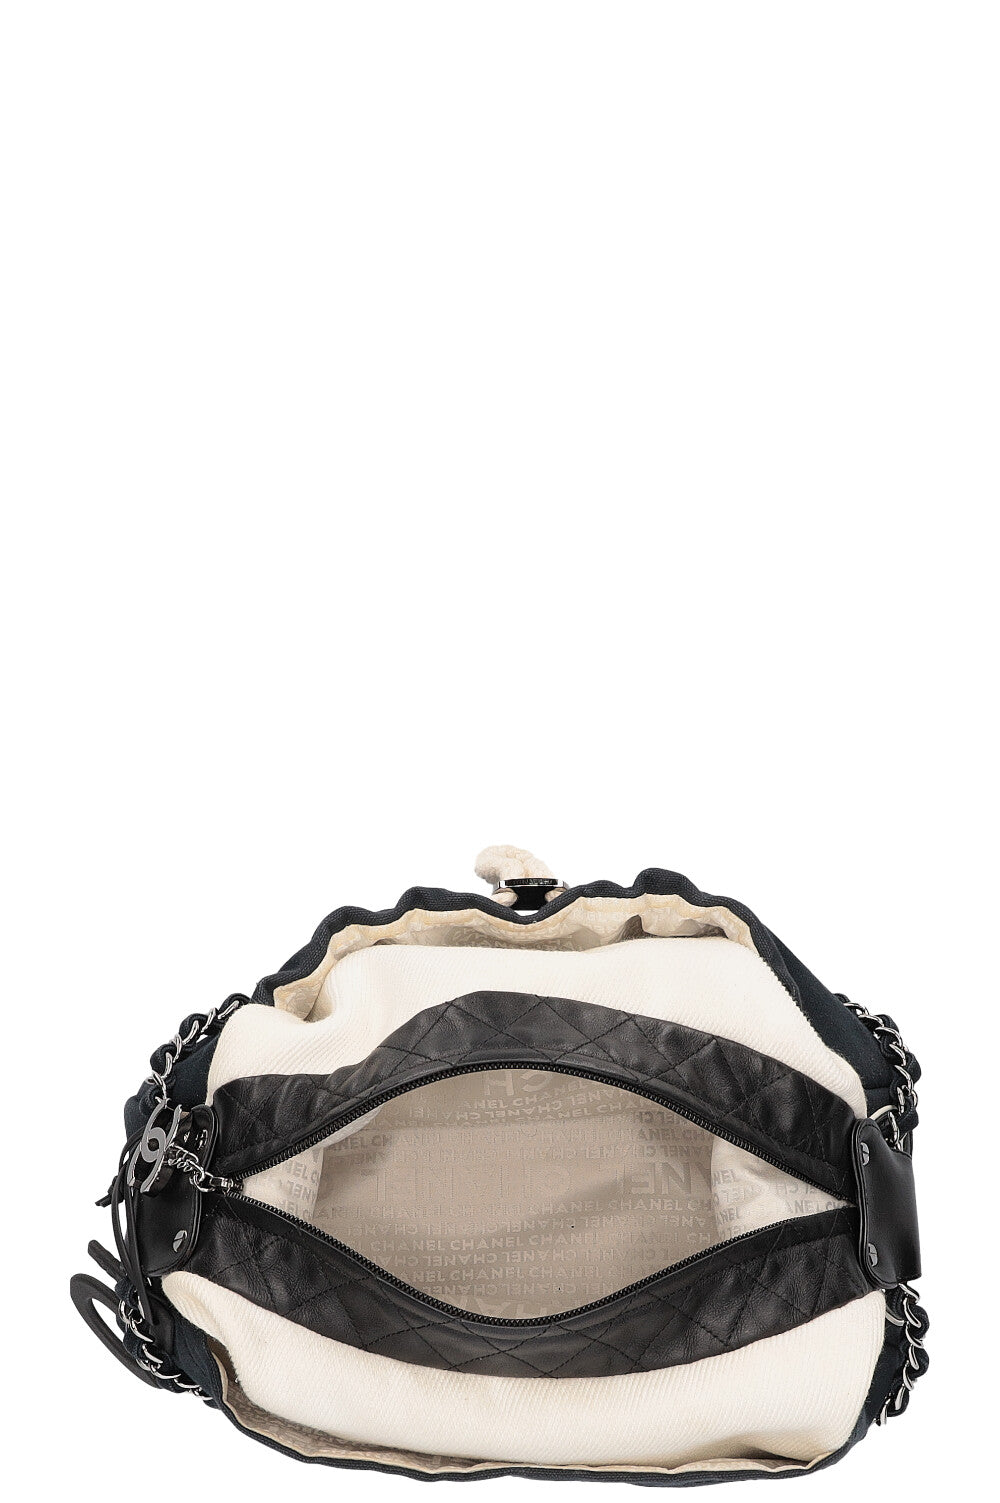 CHANEL Bag Black and White